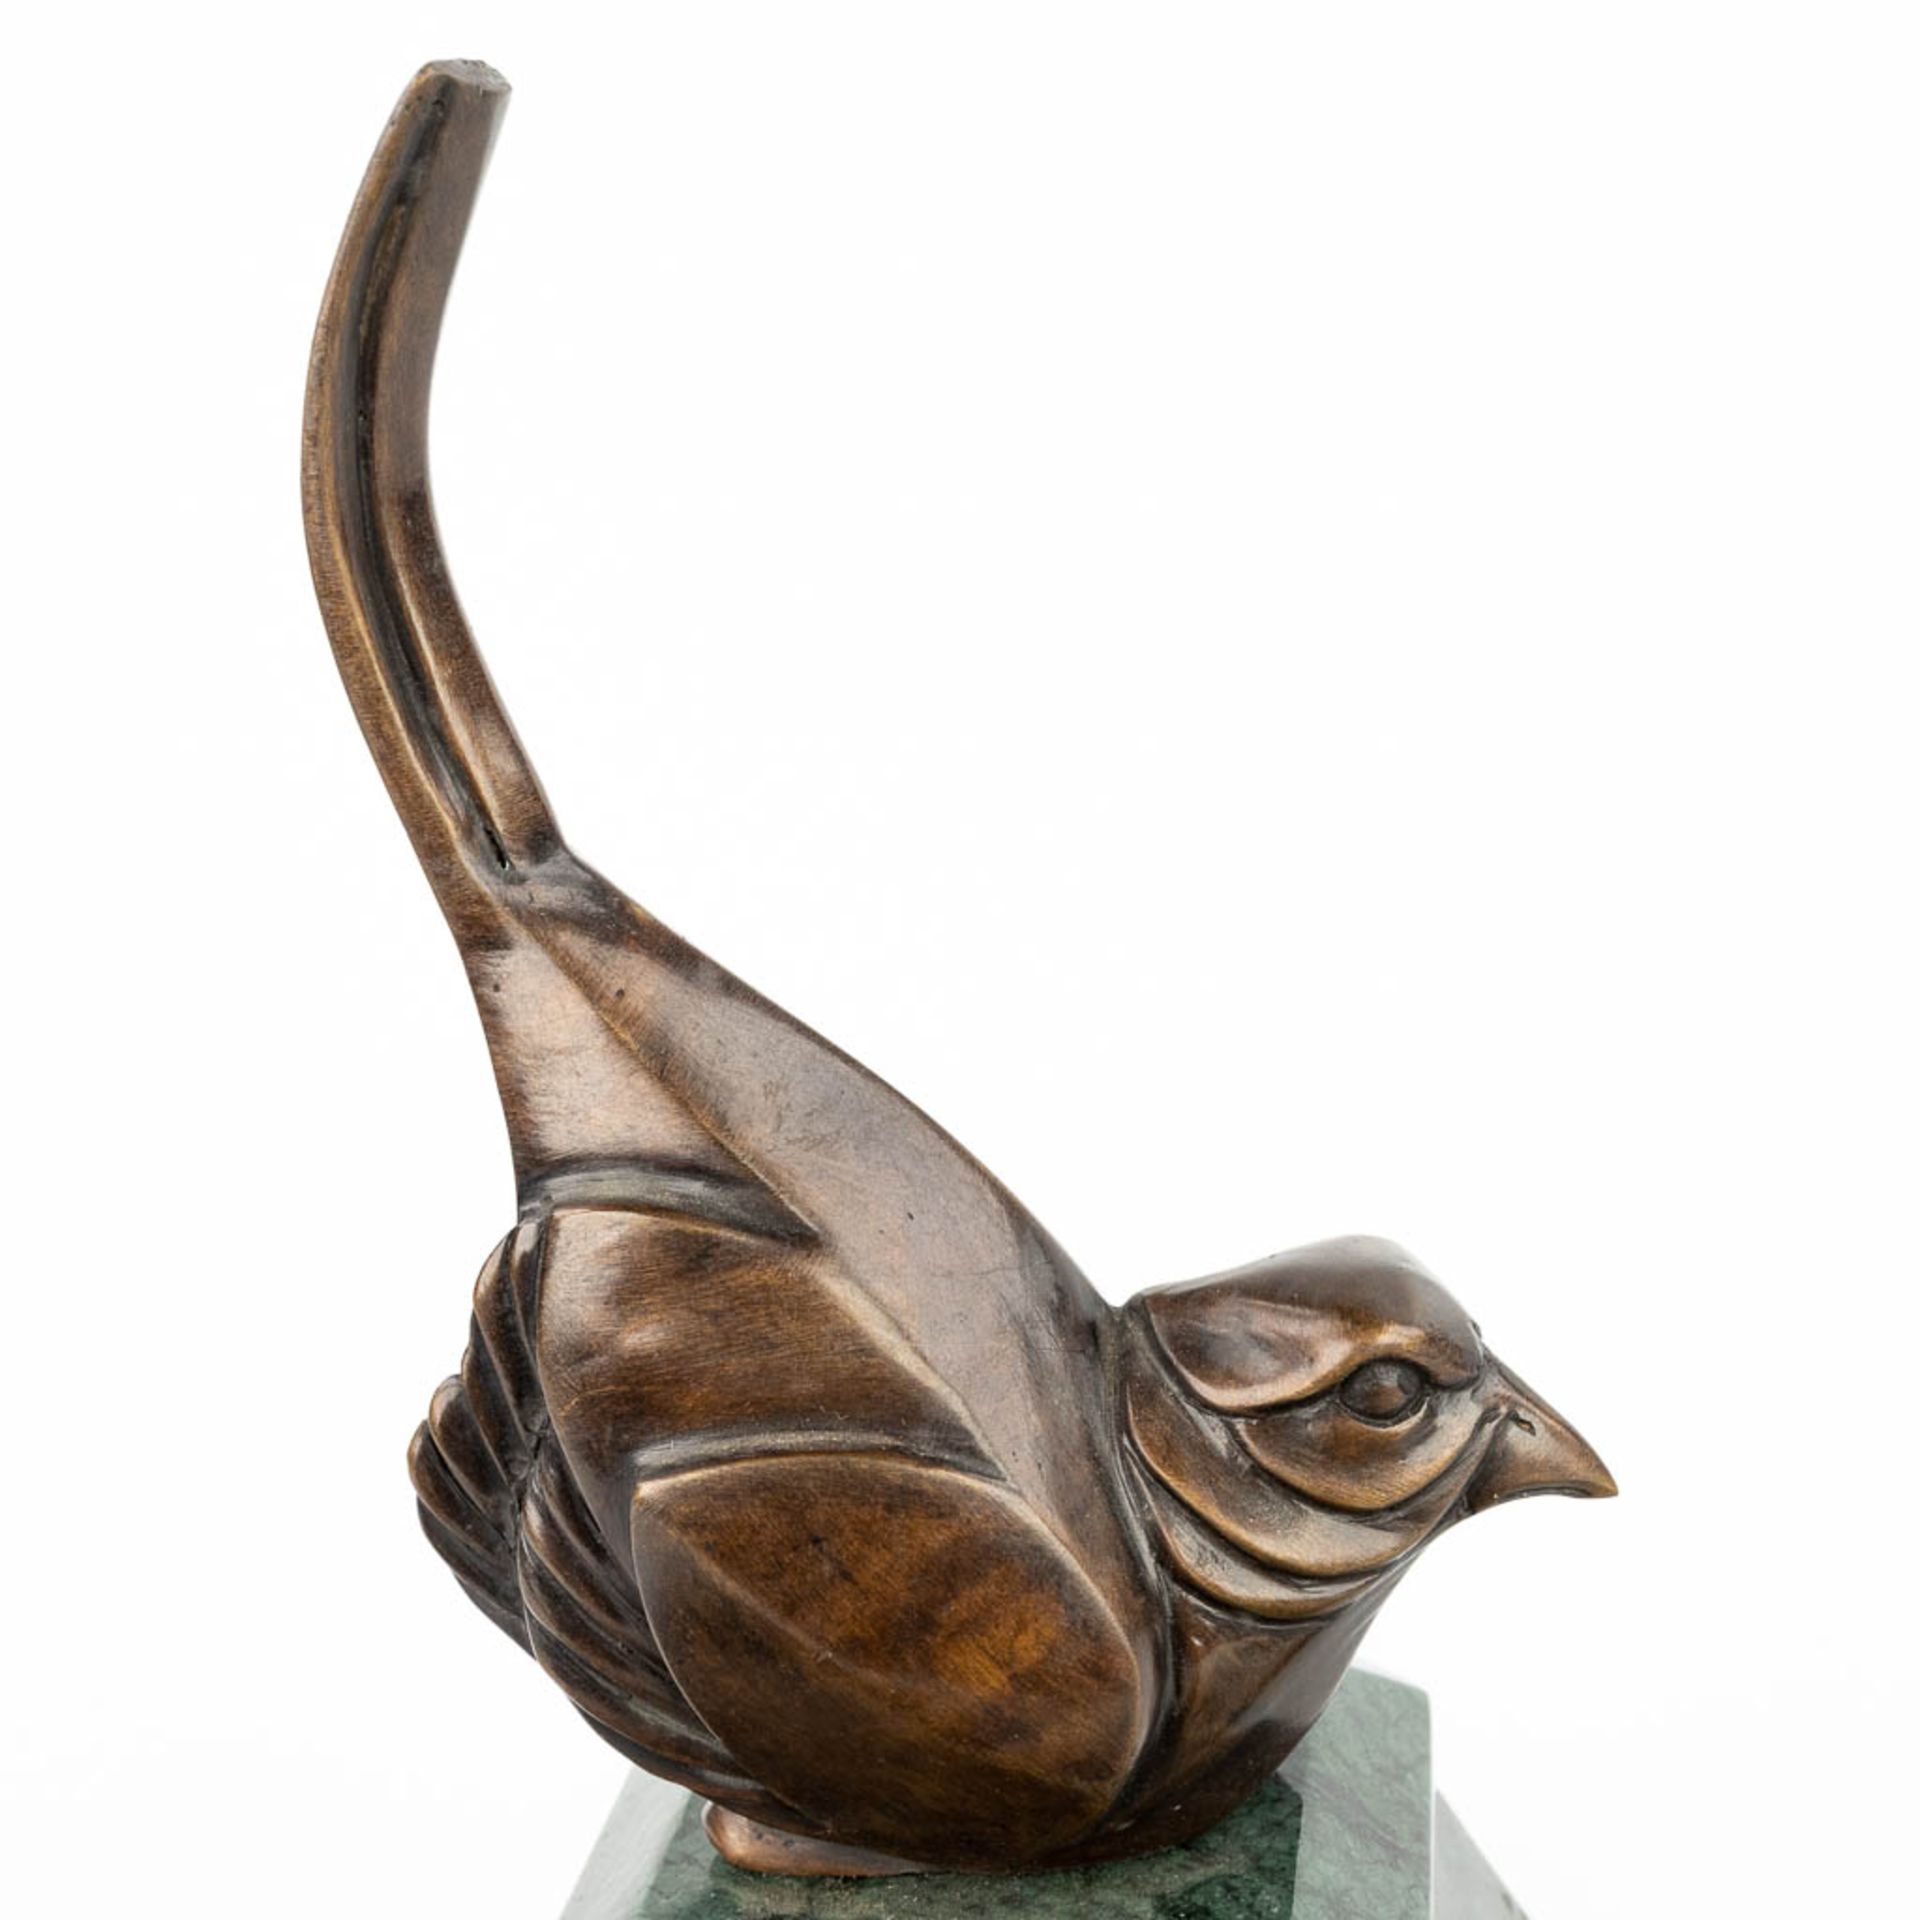 A 'Vide Poche' made of marble with a bird made of bronze in art deco style. - Image 2 of 10